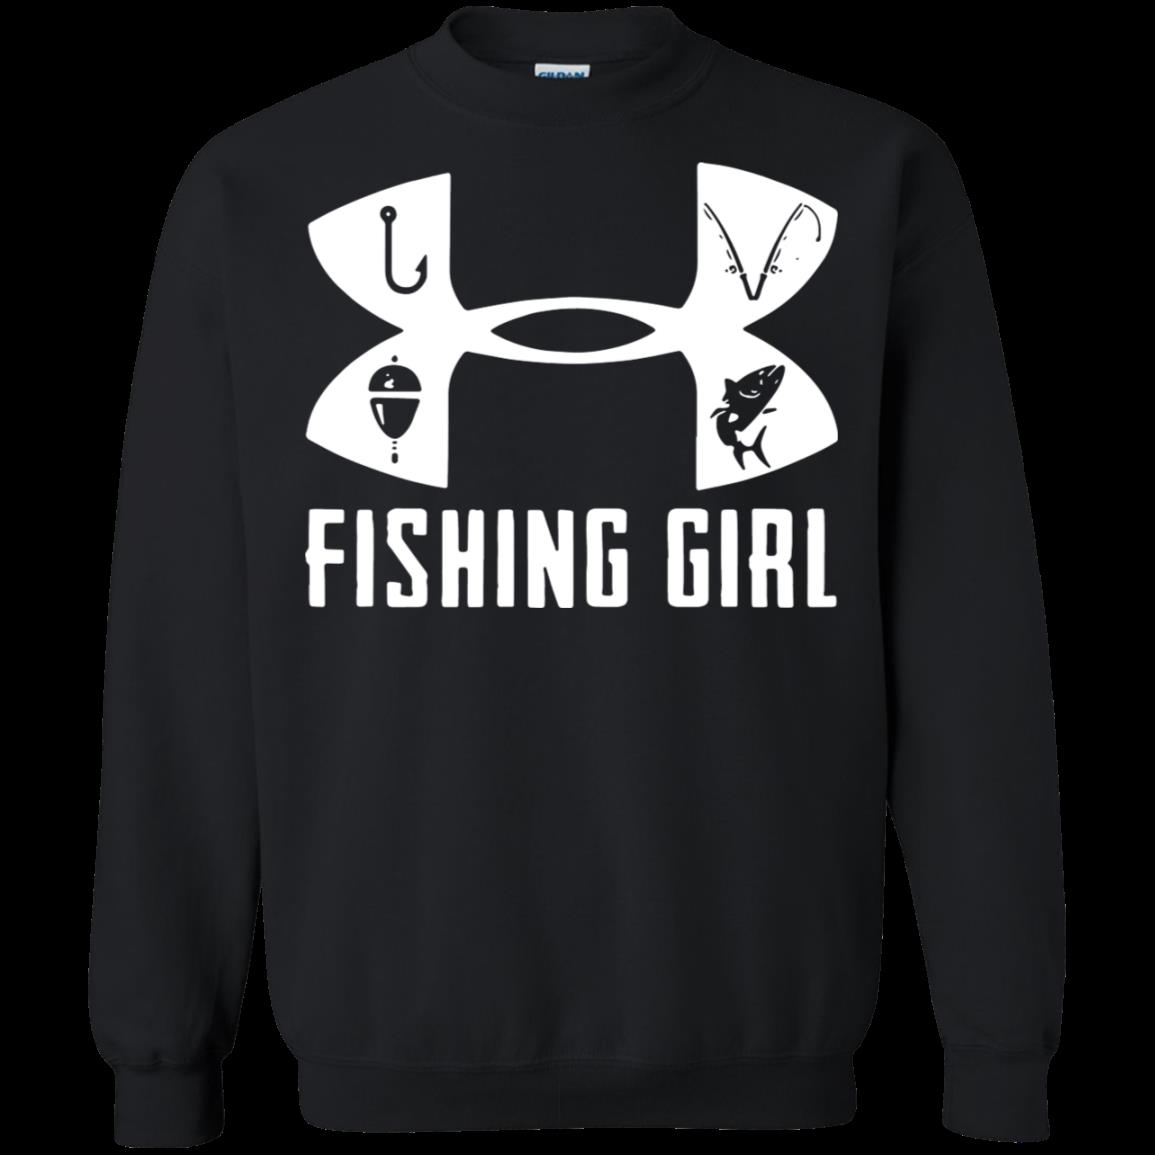 Under Armour Fishing Girl Shirt Sweatshirt funny shirts, gift shirts,  Tshirt, Hoodie, Sweatshirt , Long Sleeve, Youth, Graphic Tee » Cool Gifts  for You - Mfamilygift